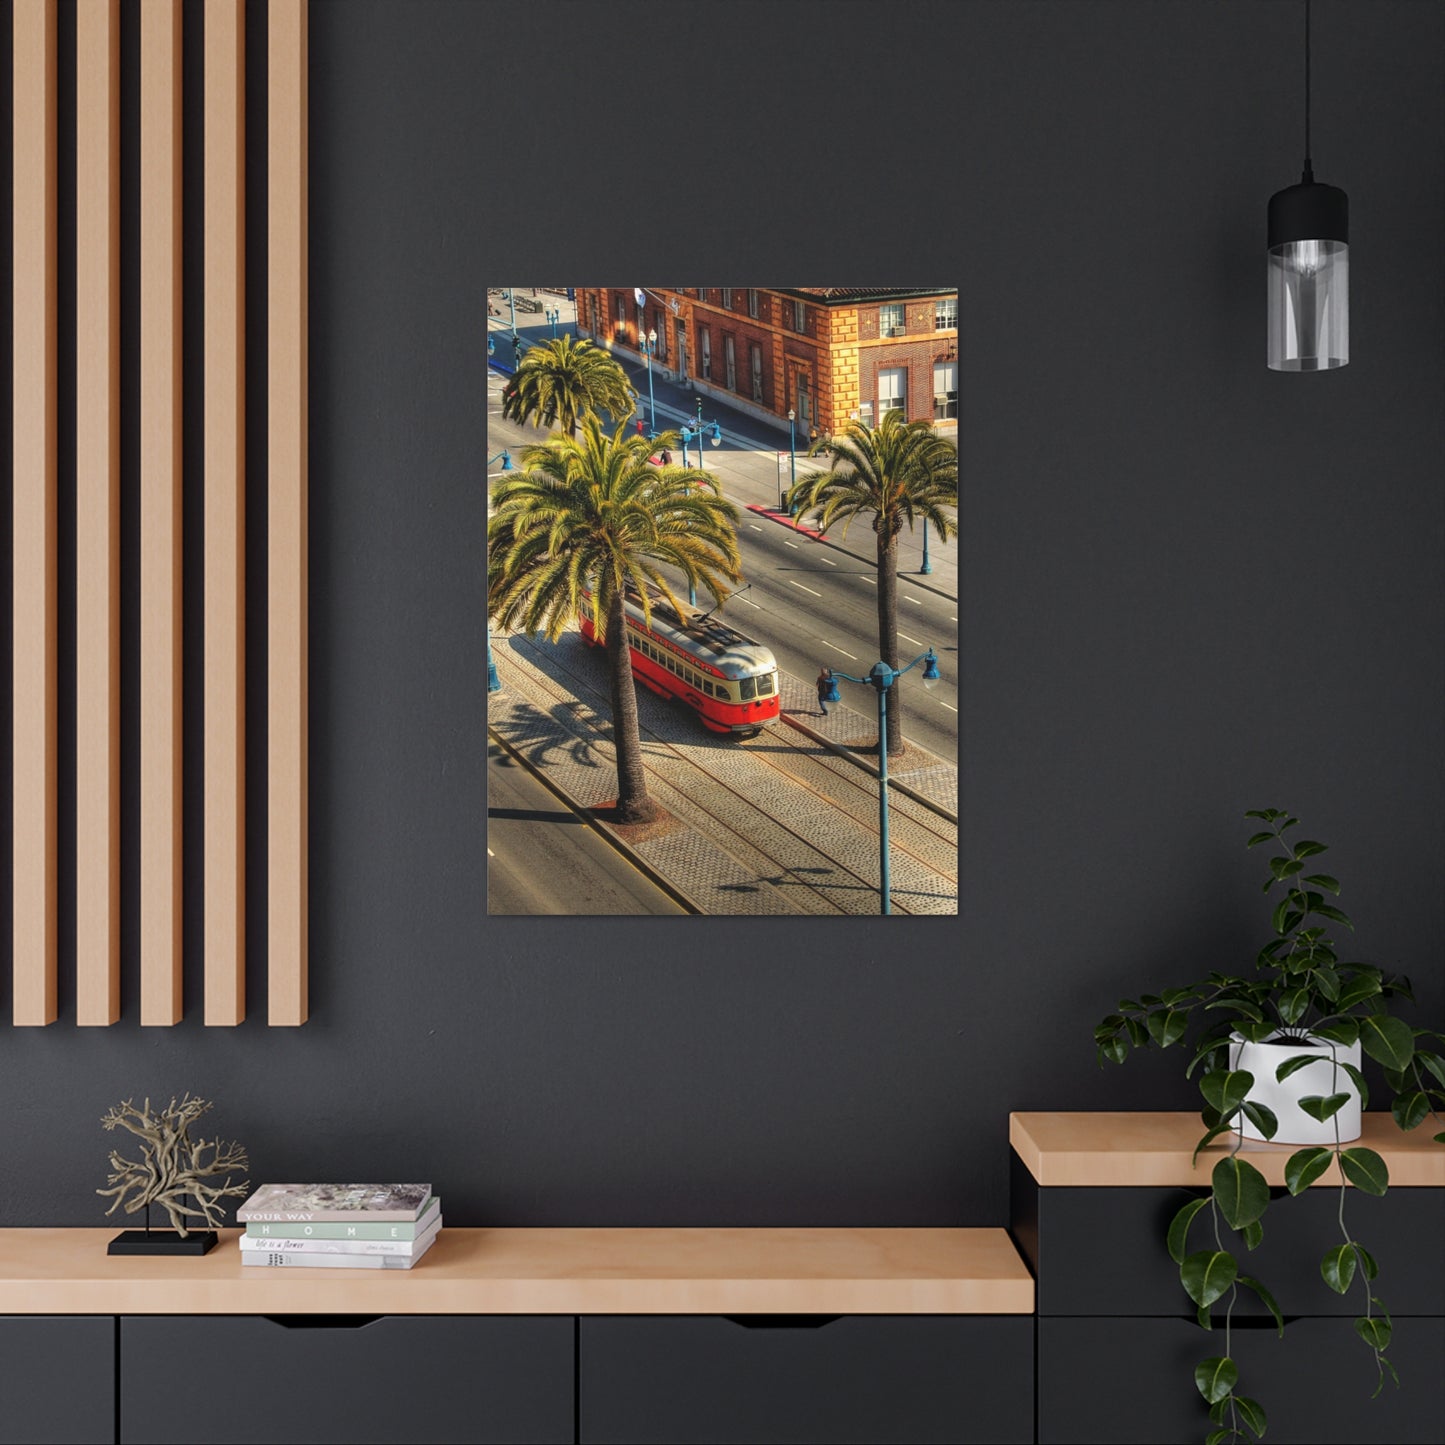 Canvas Print Of A Street Car On Embarcadero In San Francisco For Wall Art